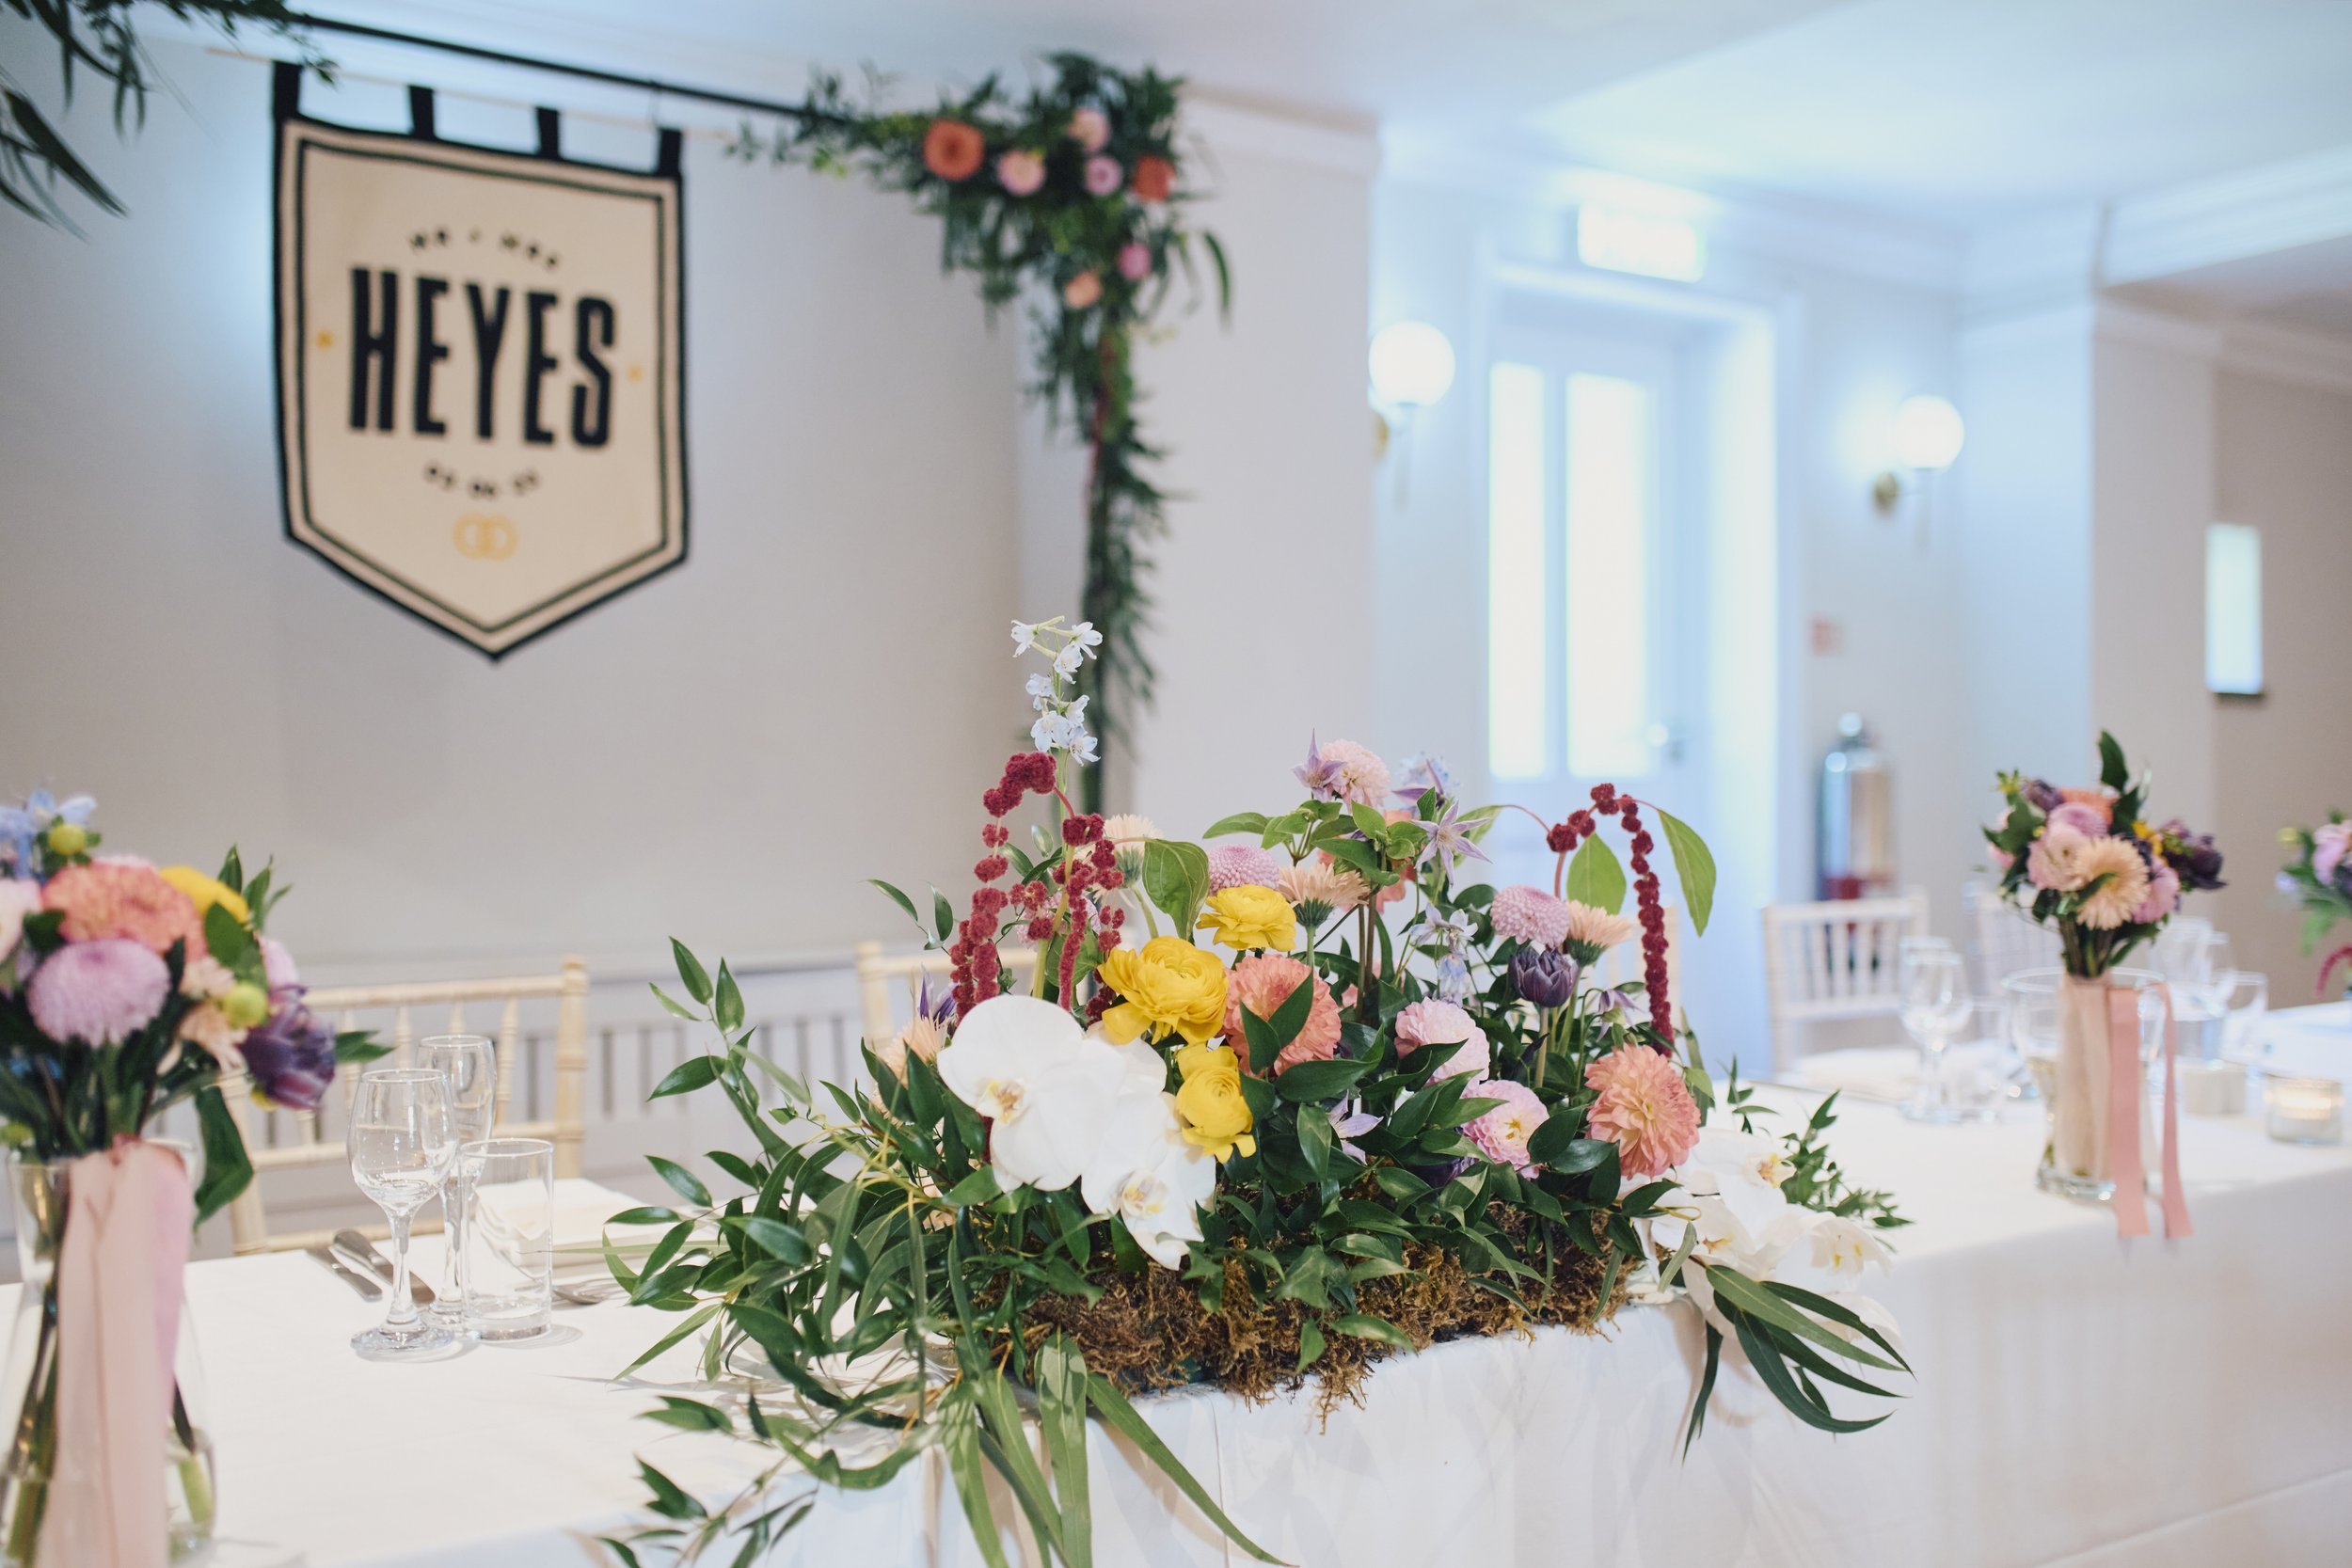  Modern, spring wedding floral  decoration on the top table. The corner of a frame behind where the bride and groom are sitting has also been decorated with flowers and foliage which compliment the florals used on the tables.   Photo by Wedding Day P